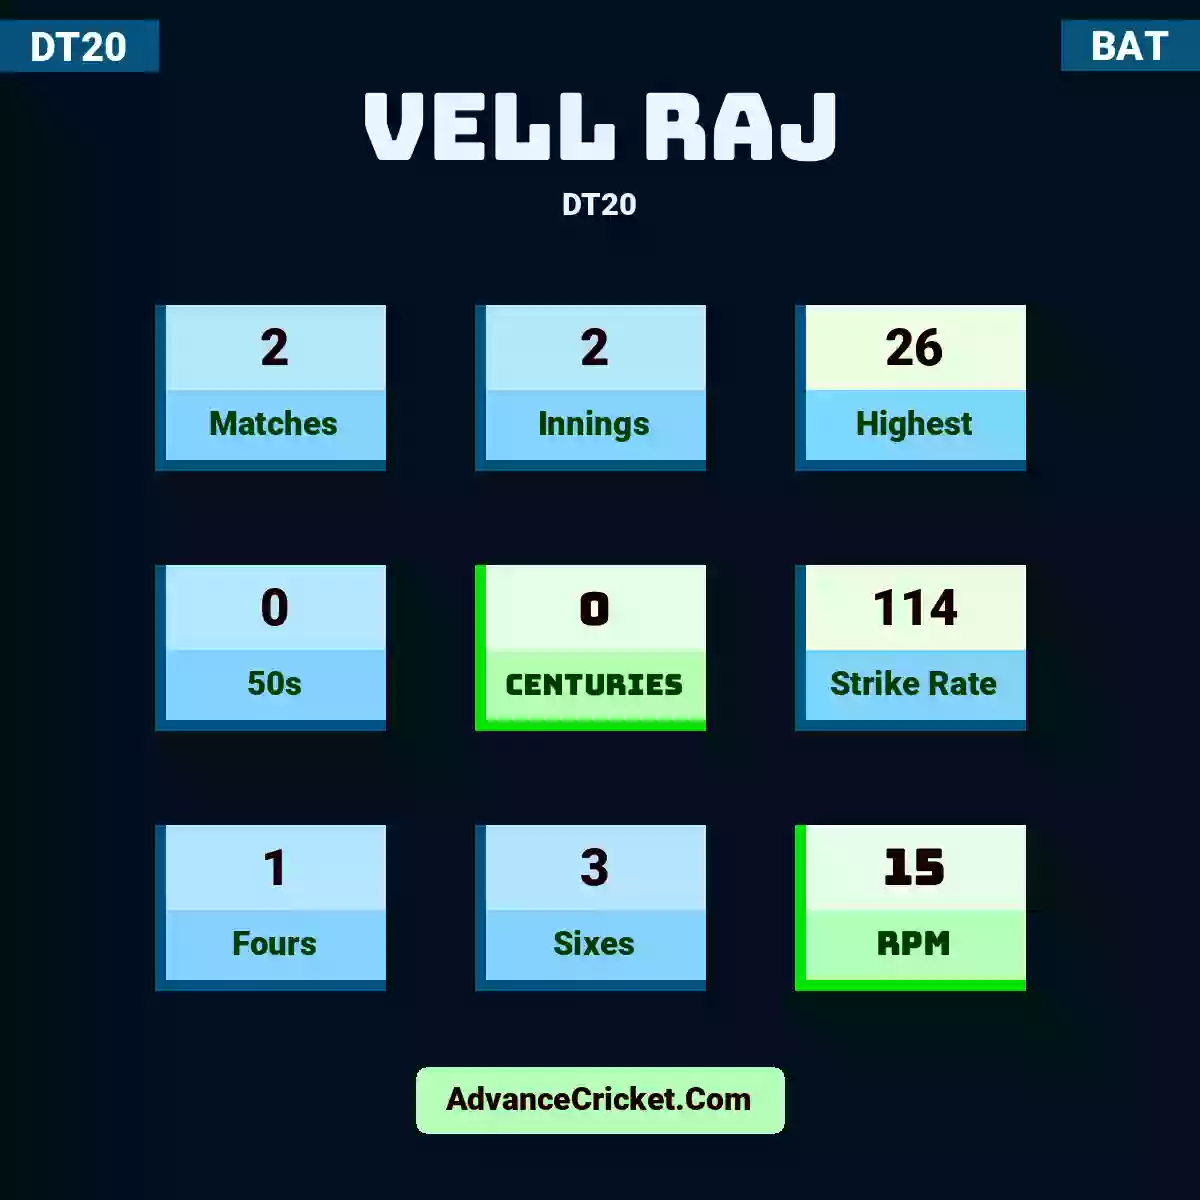 Vell raj DT20 , Vell raj played 2 matches, scored 26 runs as highest, 0 half-centuries, and 0 centuries, with a strike rate of 114. V.raj hit 1 fours and 3 sixes, with an RPM of 15.